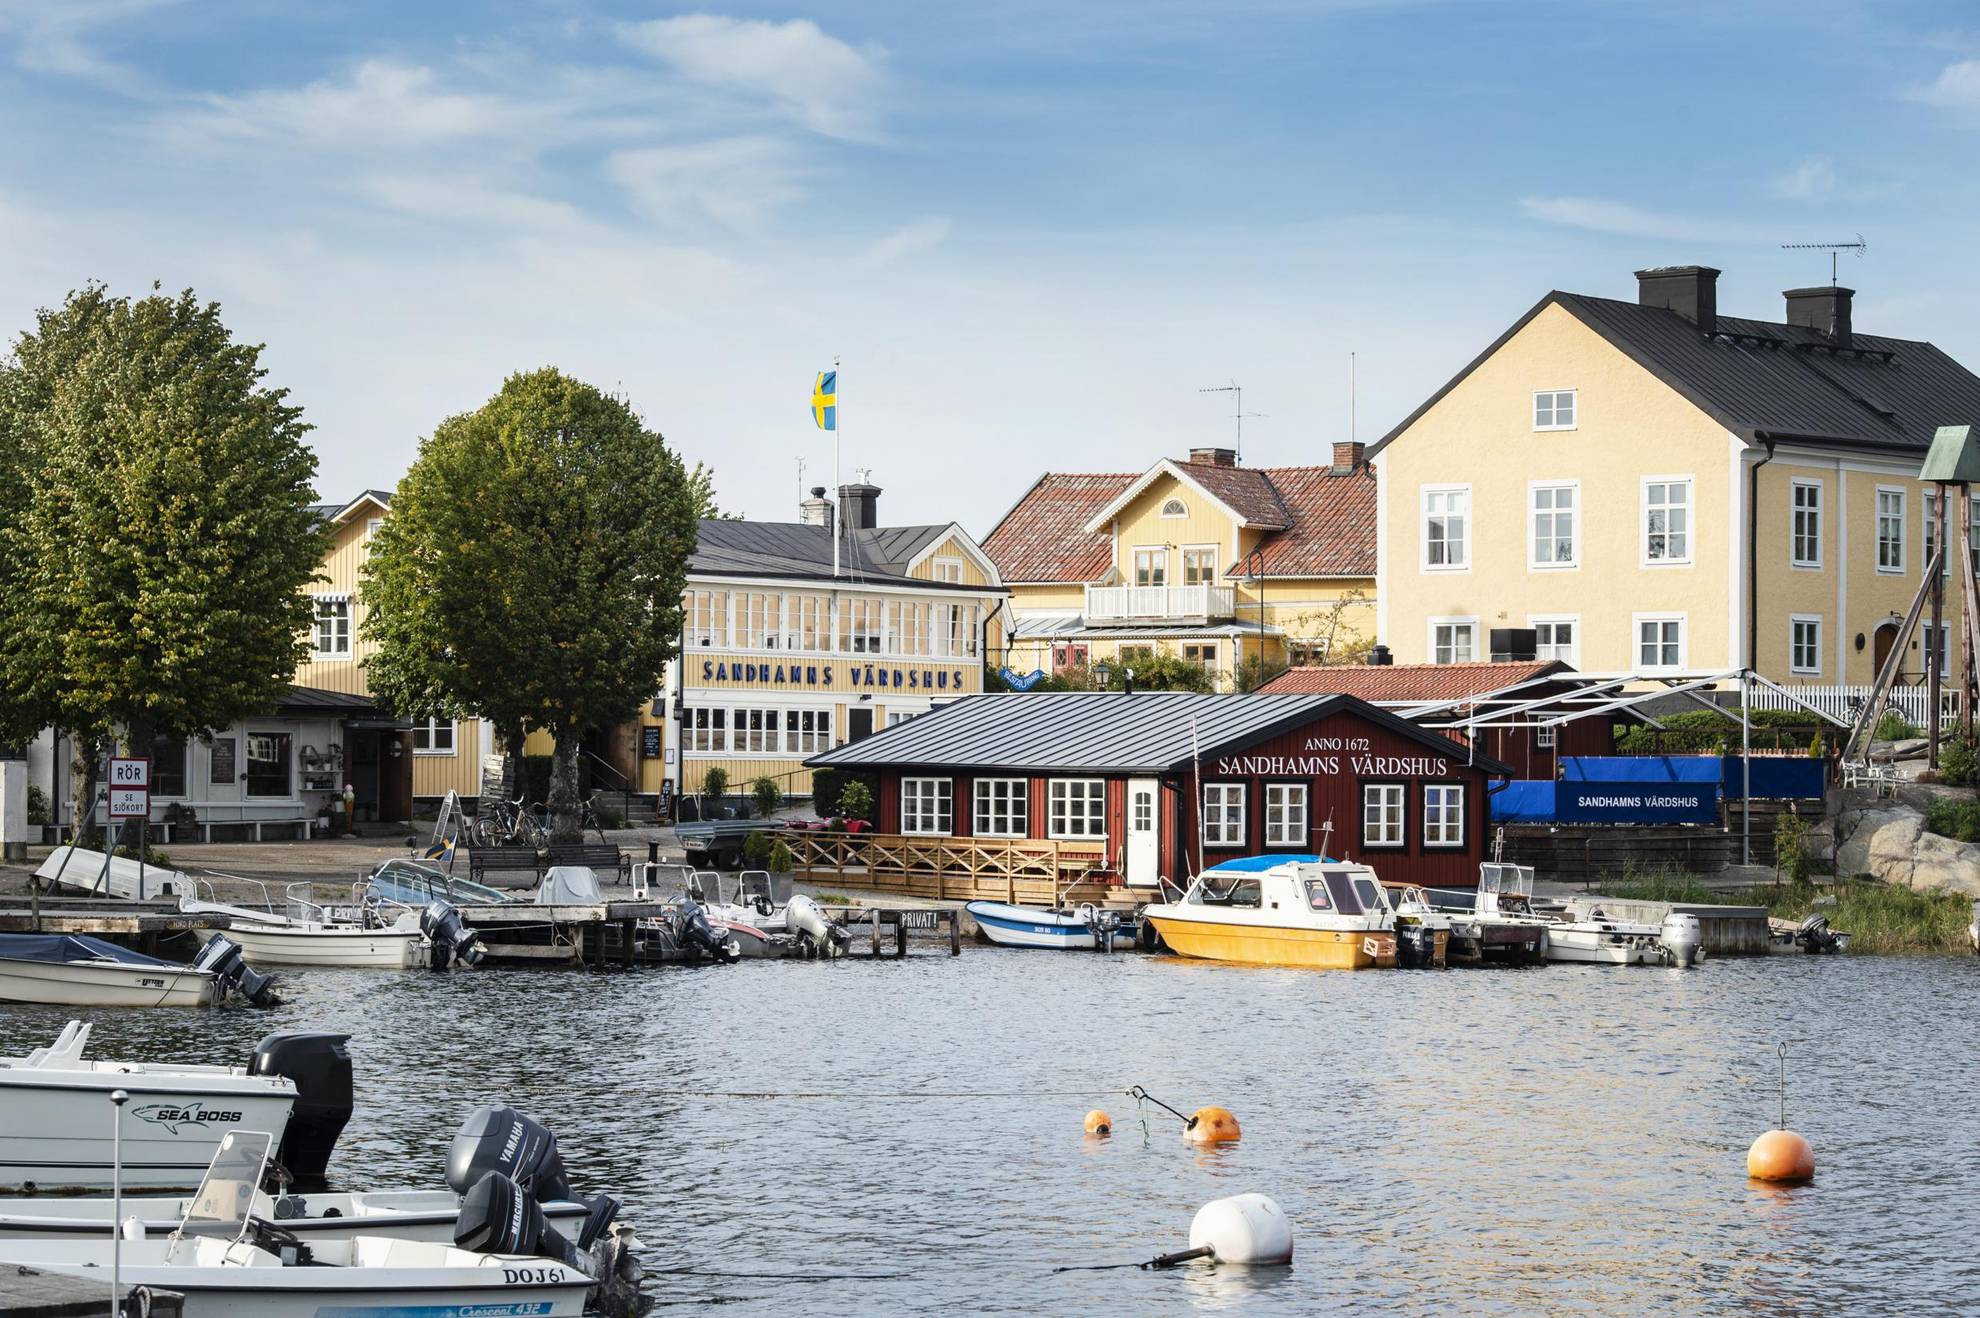 Houses in yellow and red, located by a harbour with many small boats in Sandhamn.